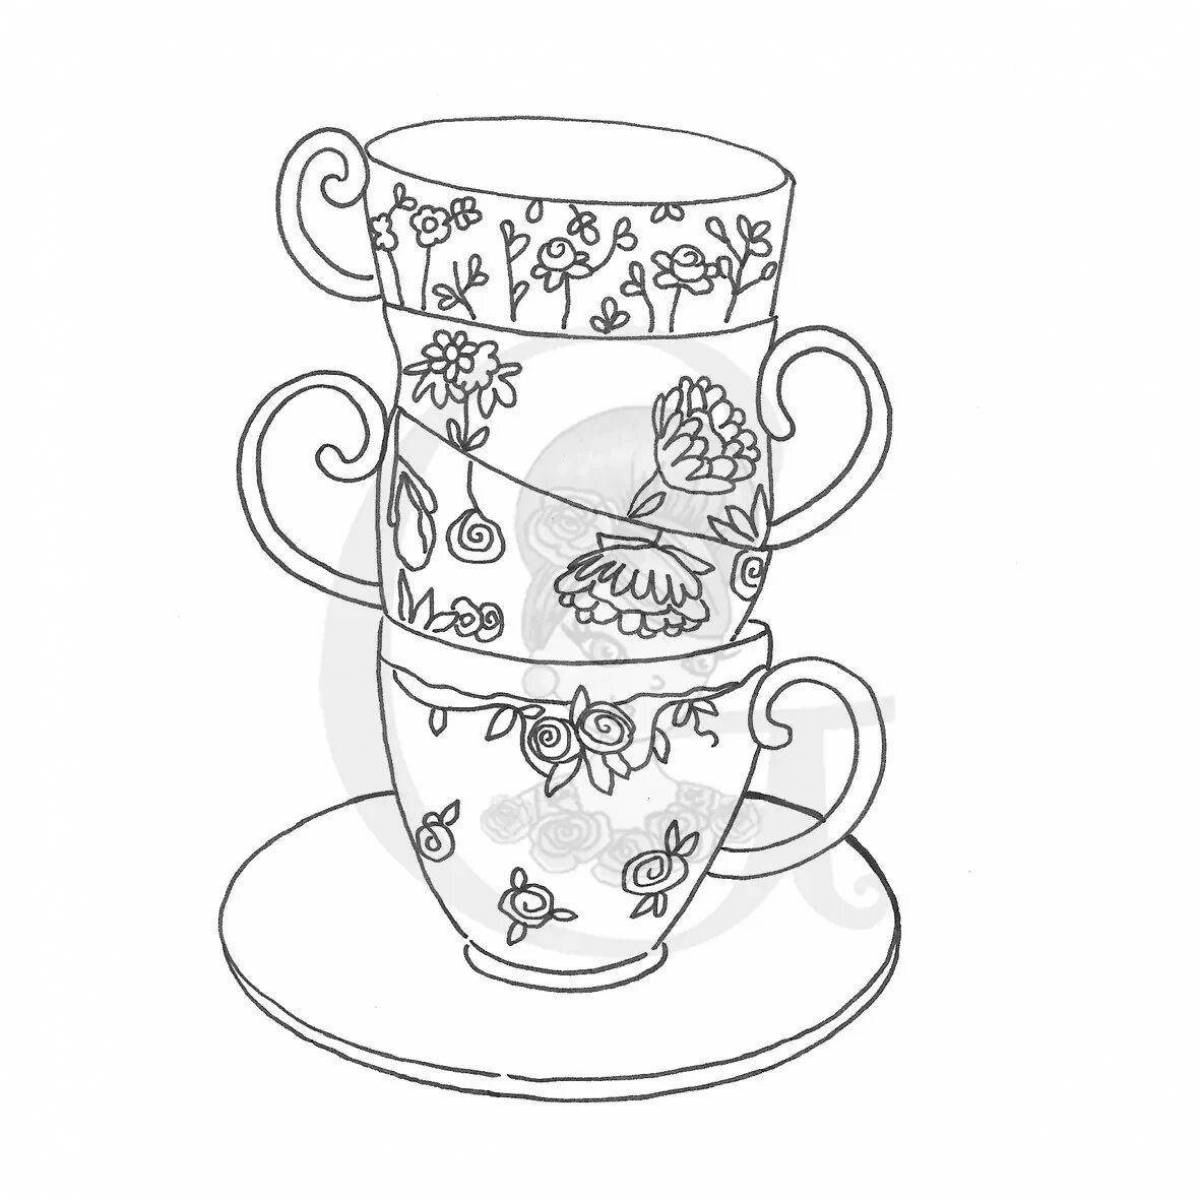 Glitter tea cup coloring page